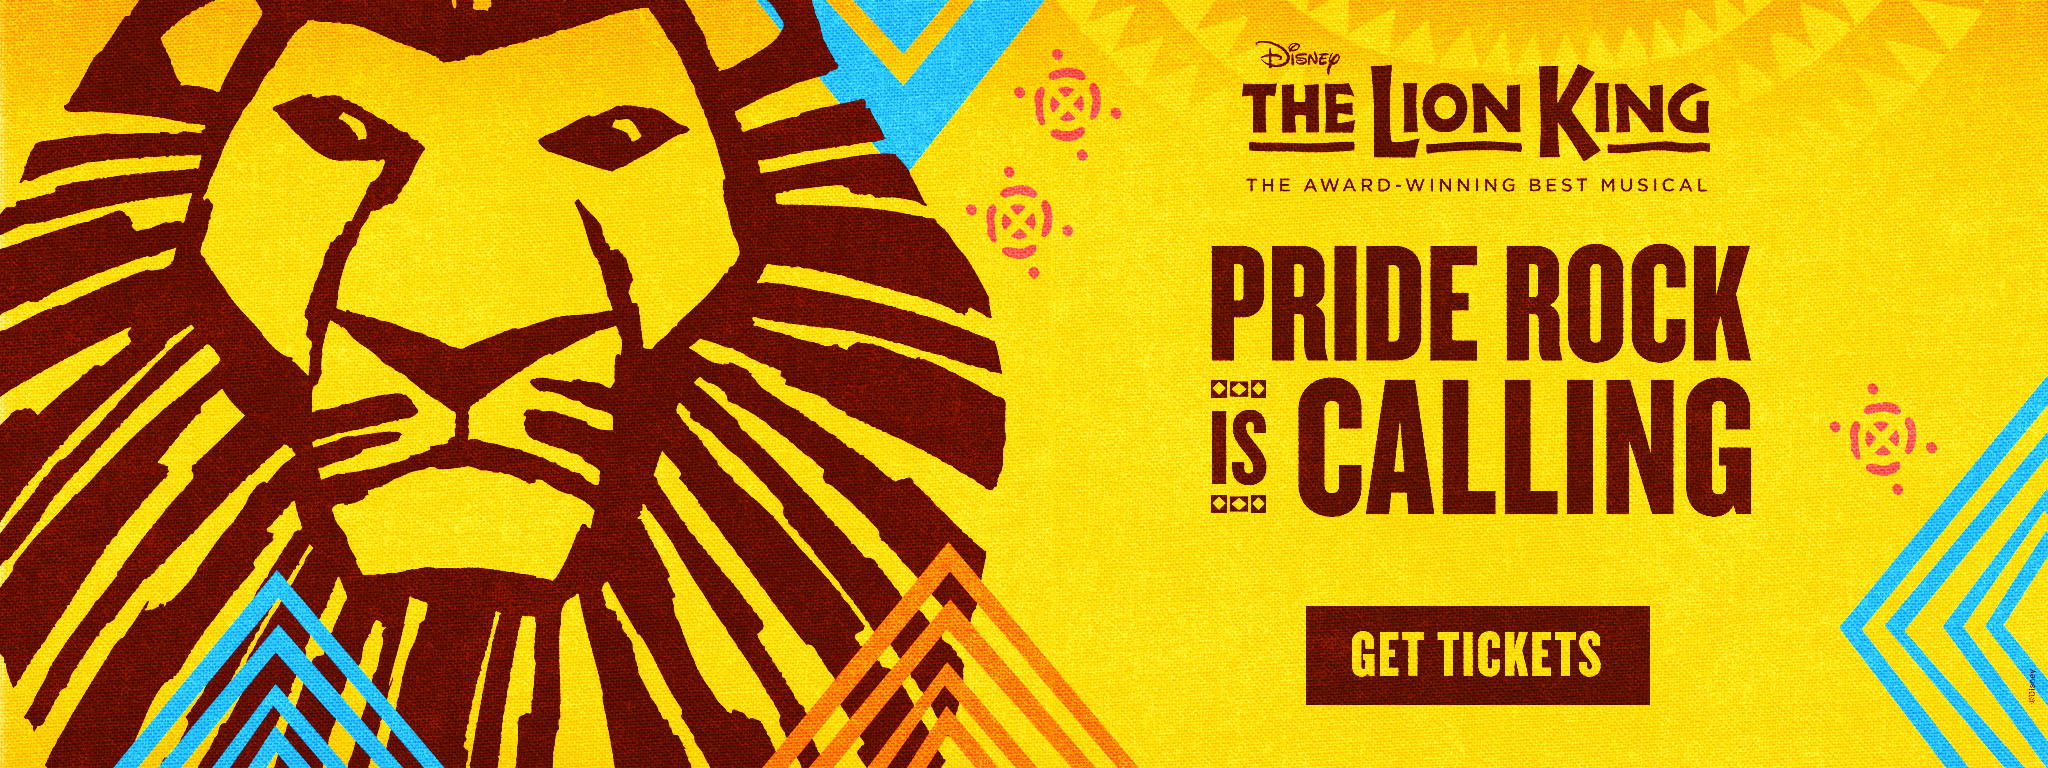 Disney THE LION KING - Pride Rock is Calling - GET TICKETS